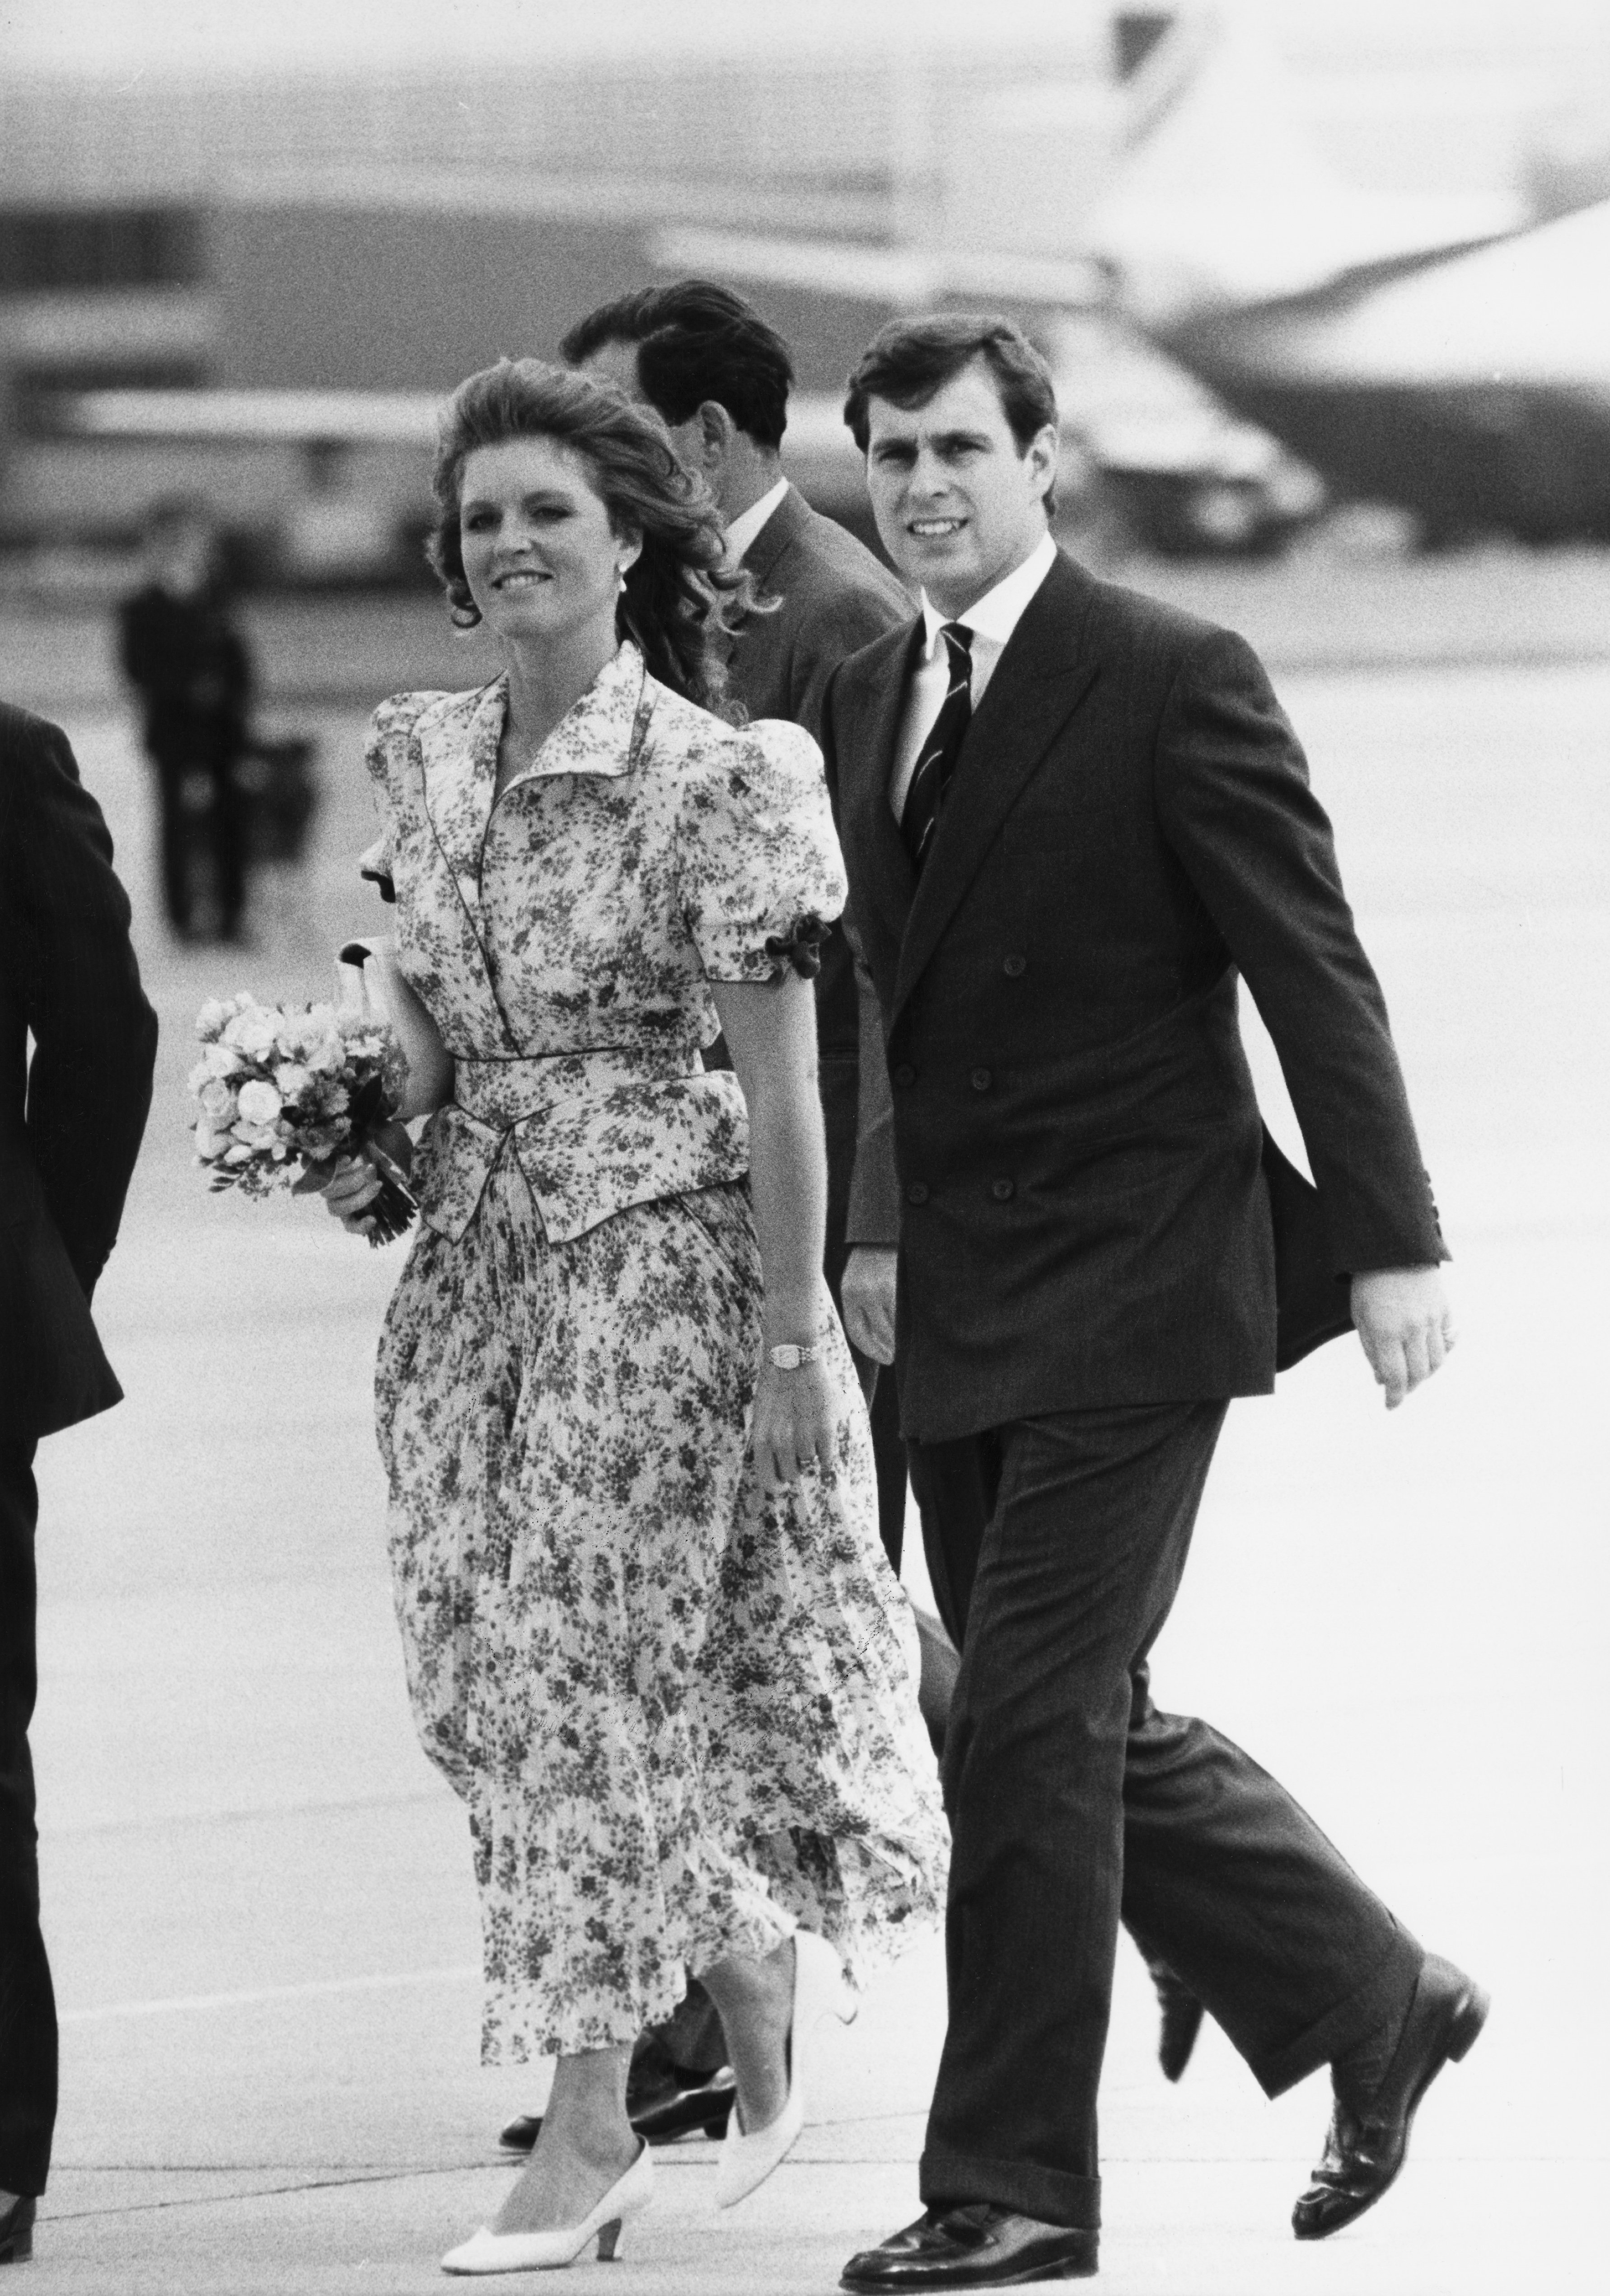 Prince Andrew and his wife Sarah (nee Ferguson) at Heathrow Airport as they leave for their honeymoon, 23rd July 1986. | Source: Getty Images